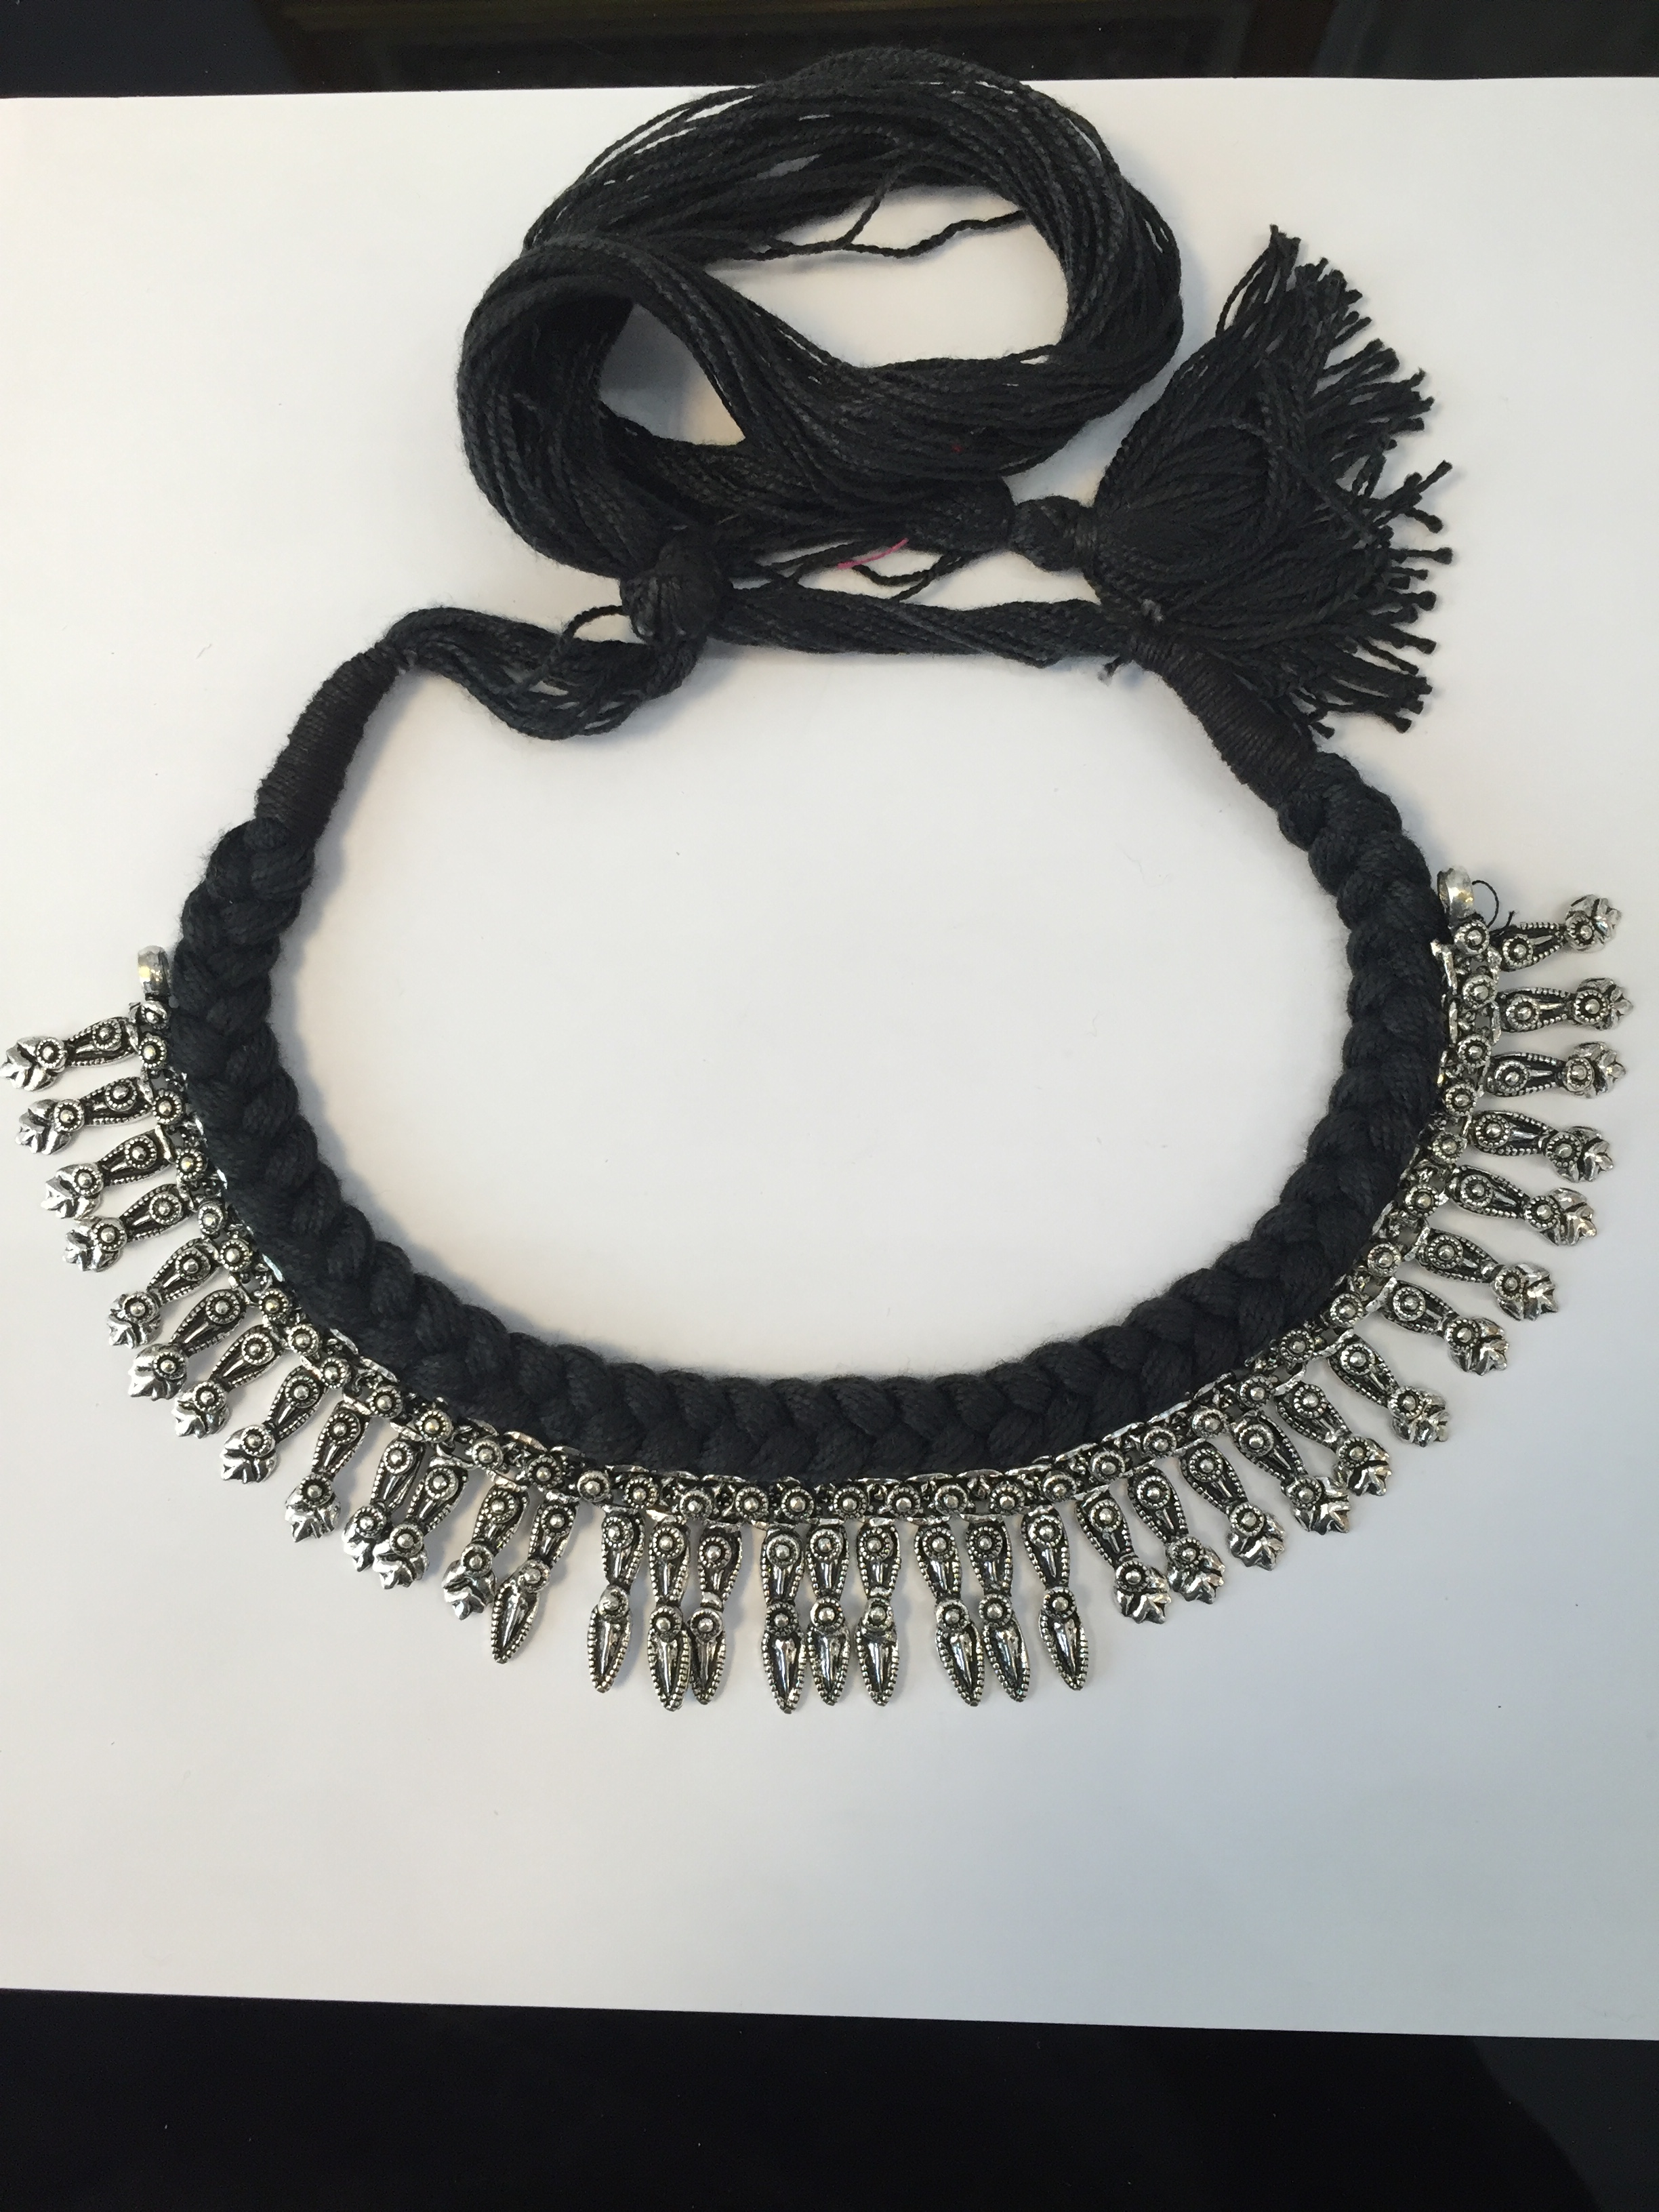 TIBETAN STYLE .925 SILVER JEWELRY NECKLACE SIZE 17-18 INCHES WITH BLACK THREAD